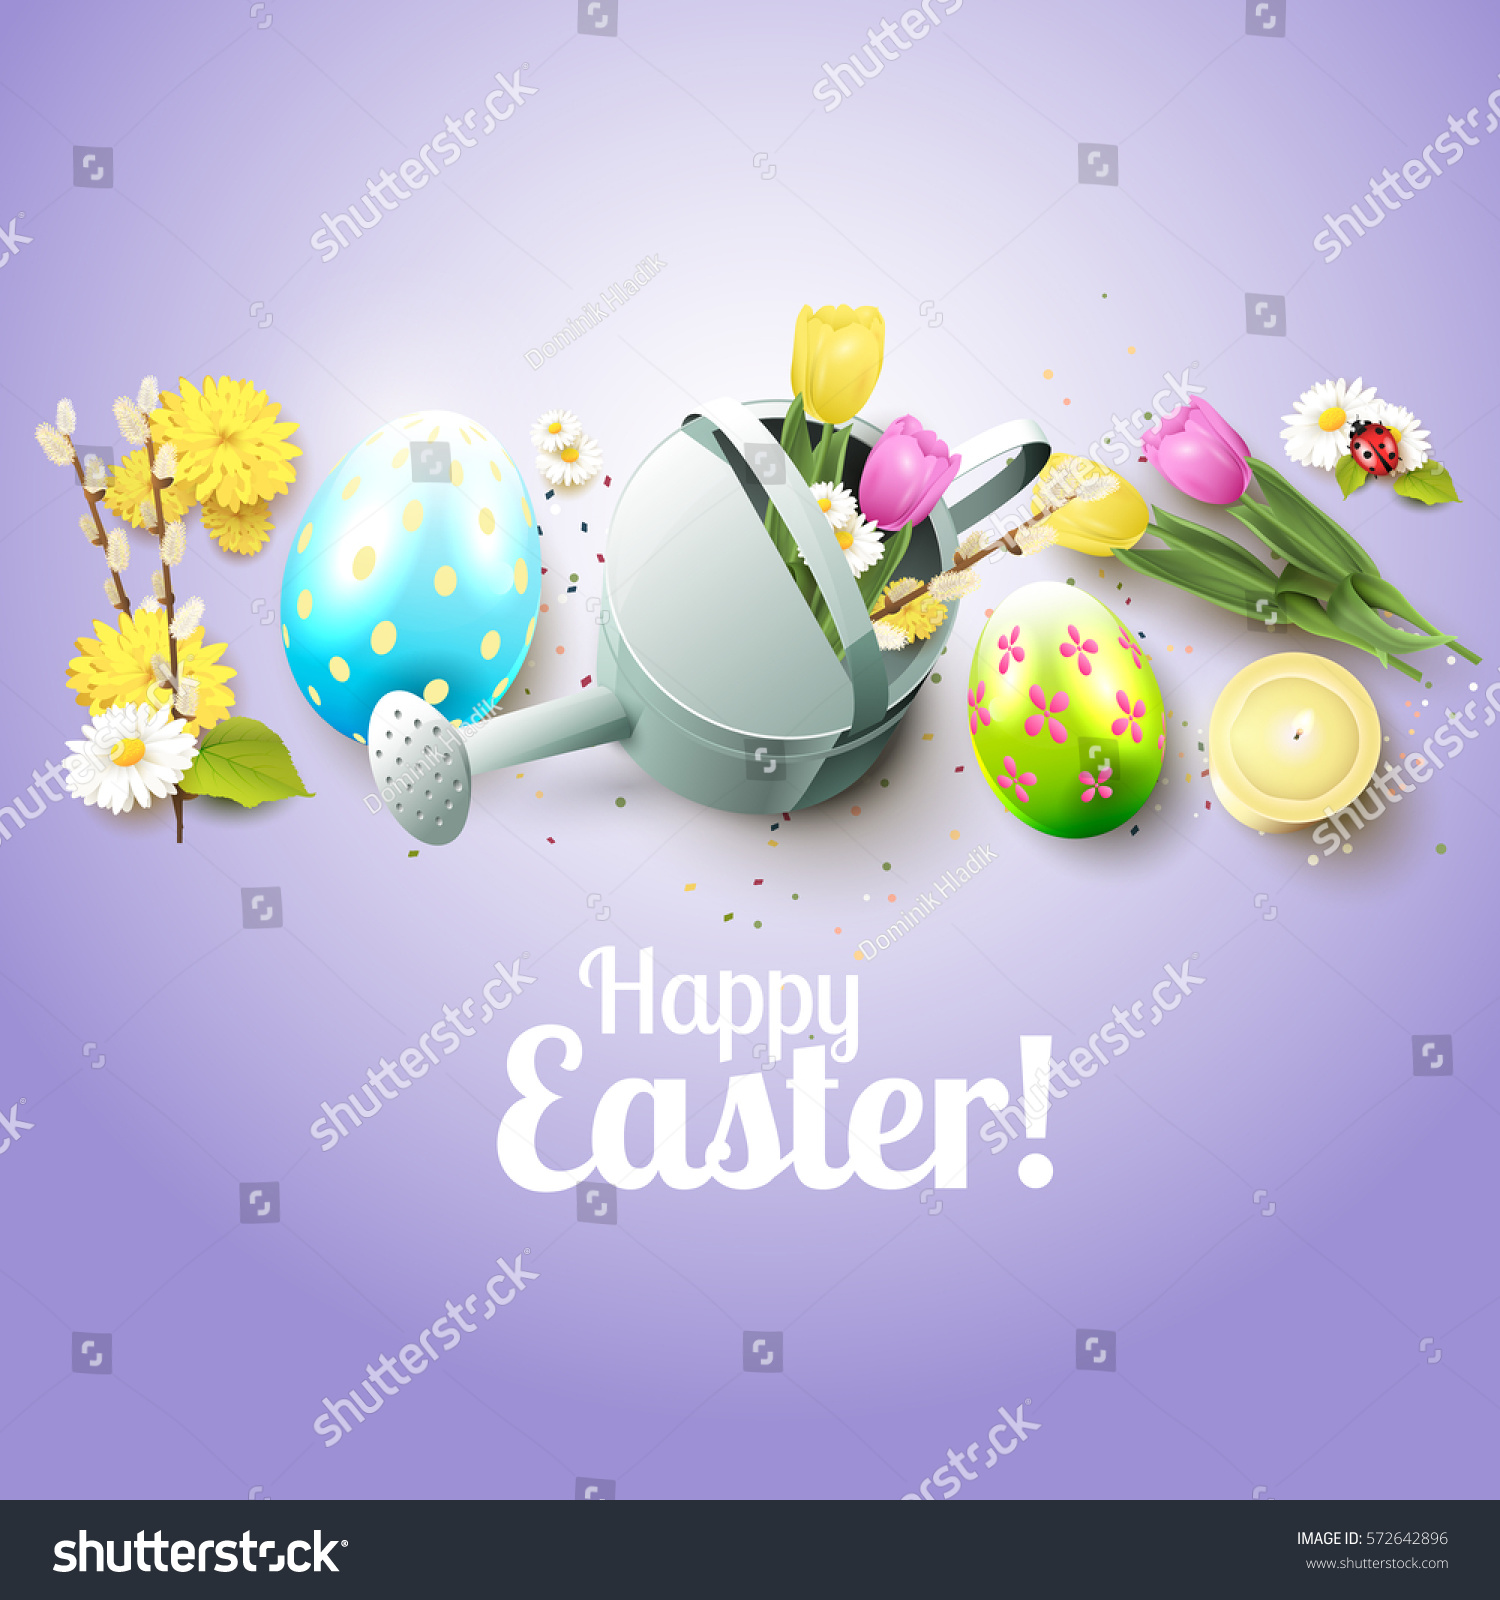 Cute Easter greeting card with flowers, Easter eggs and watering can #572642896